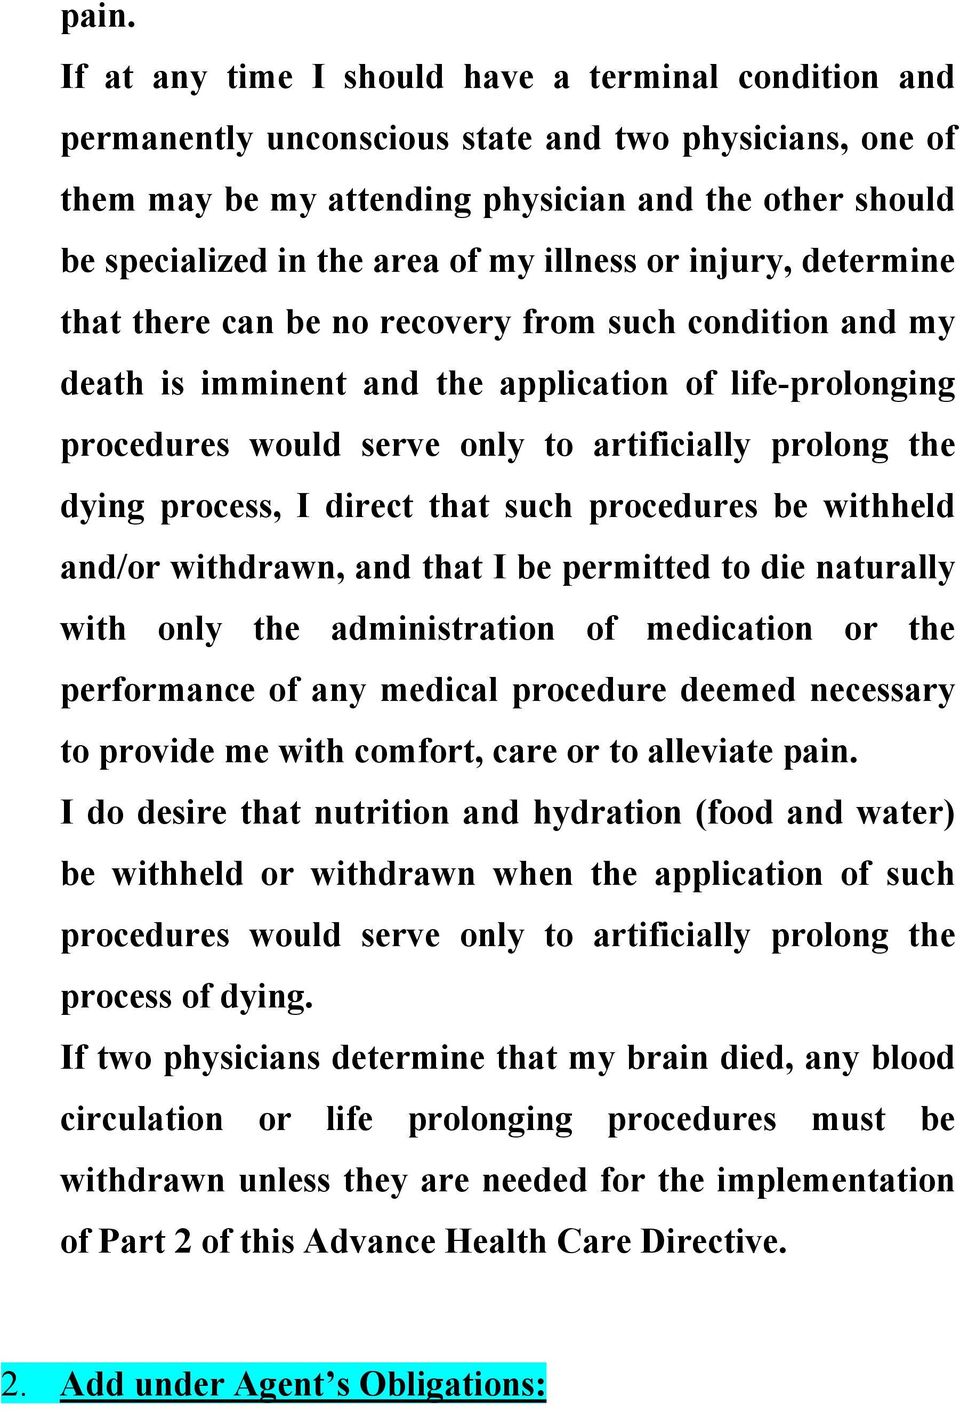 prolong the dying process, I direct that such procedures be withheld and/or withdrawn, and that I be permitted to die naturally with only the administration of medication or the performance of any